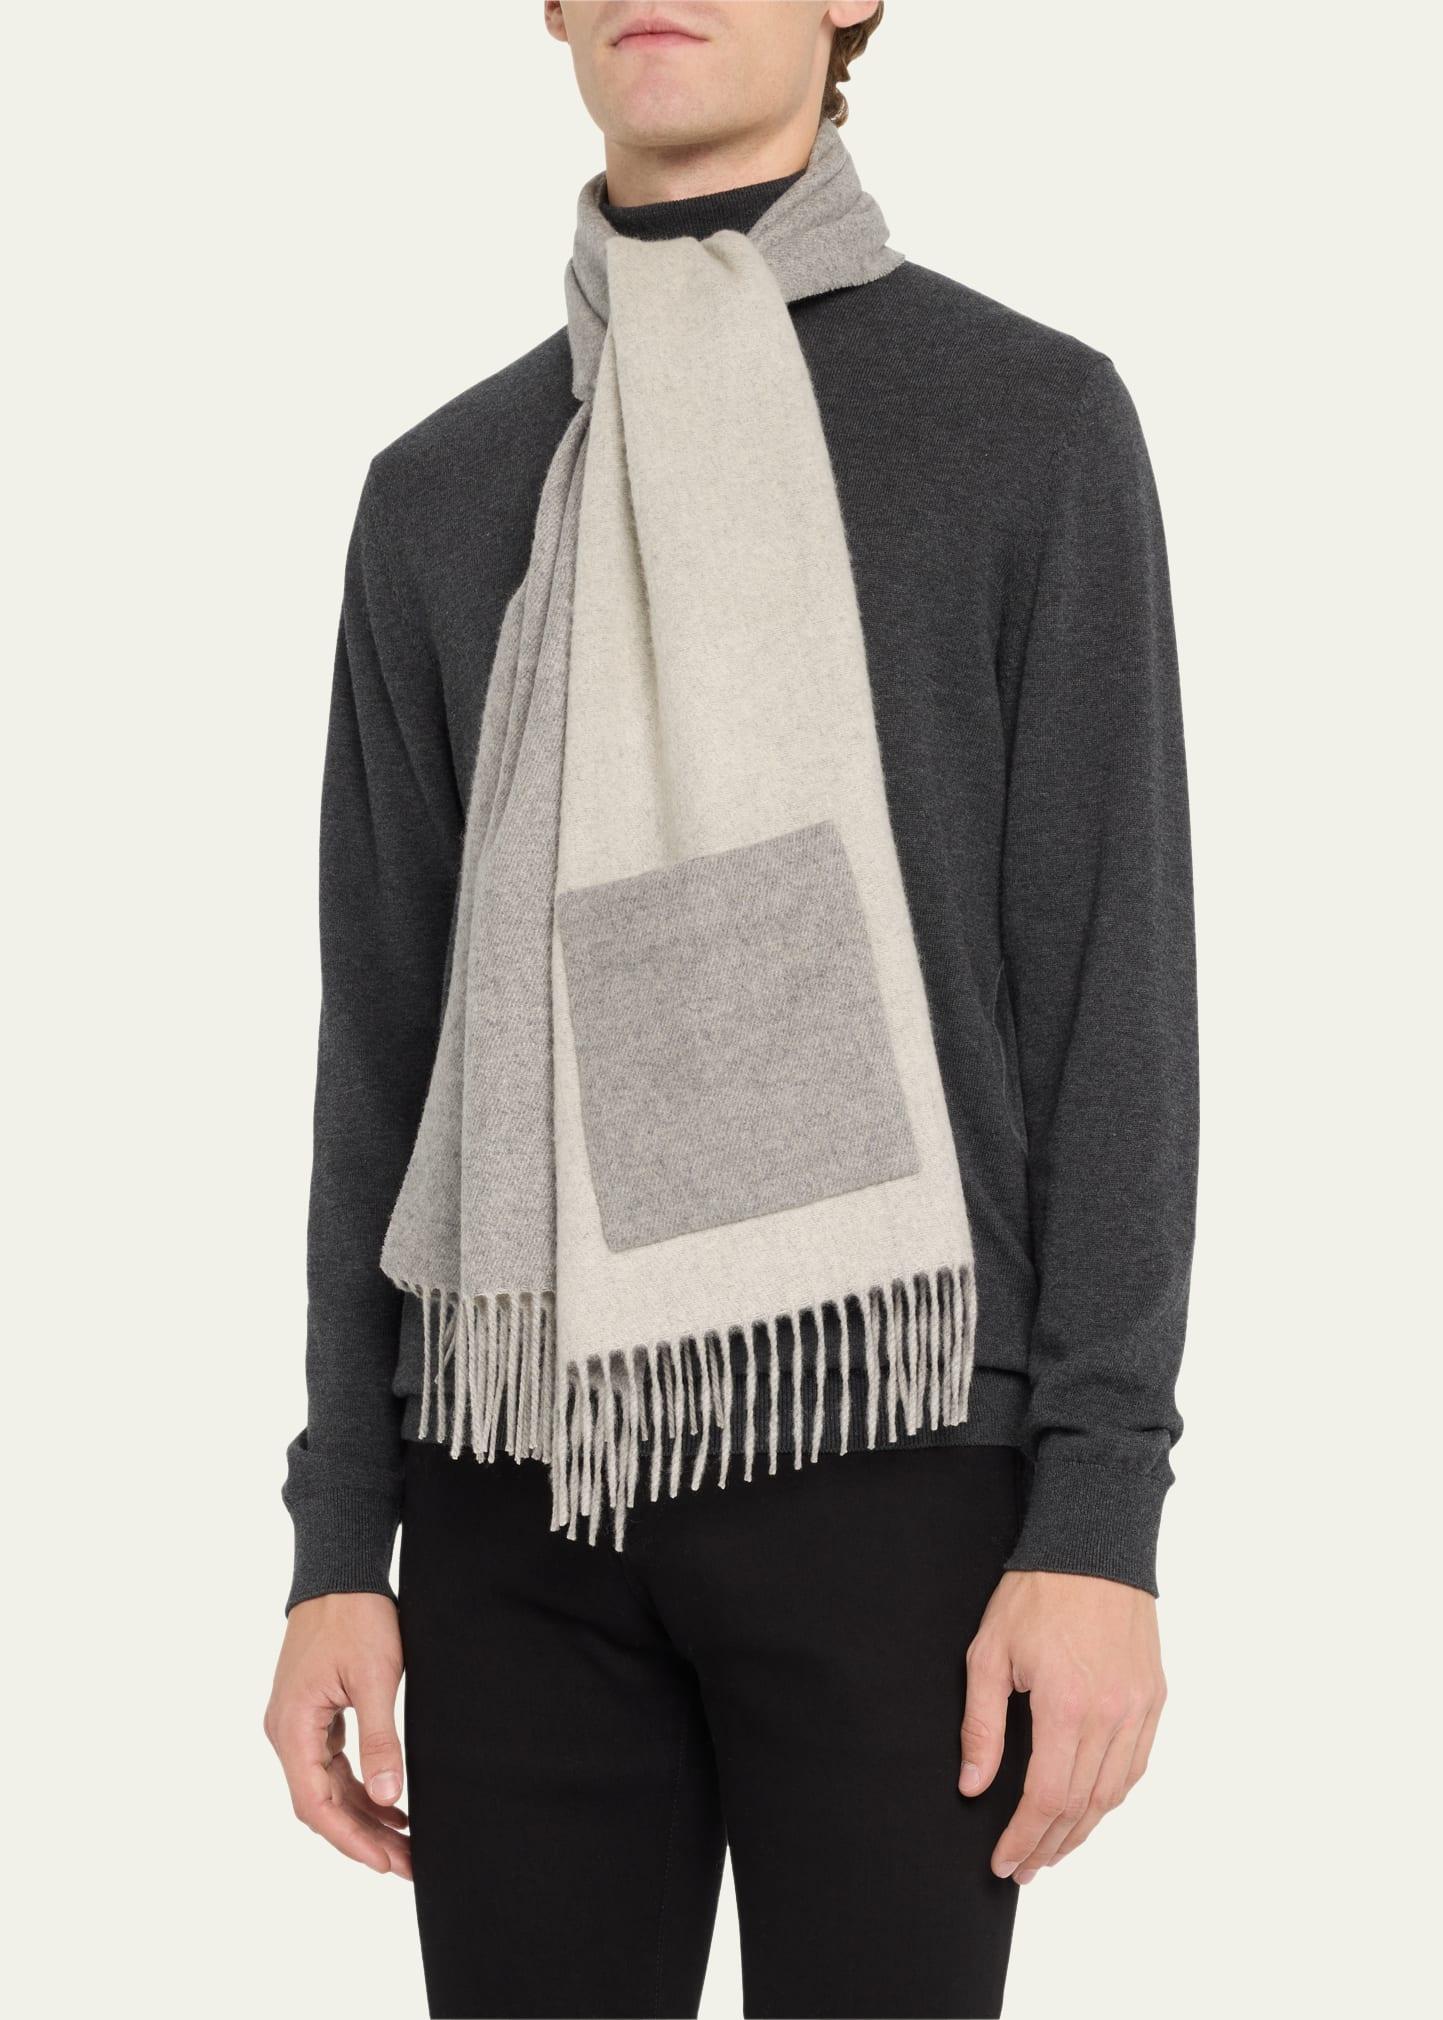 ALONPI Cashmere Scarf With Pocket in Gray for Men | Lyst